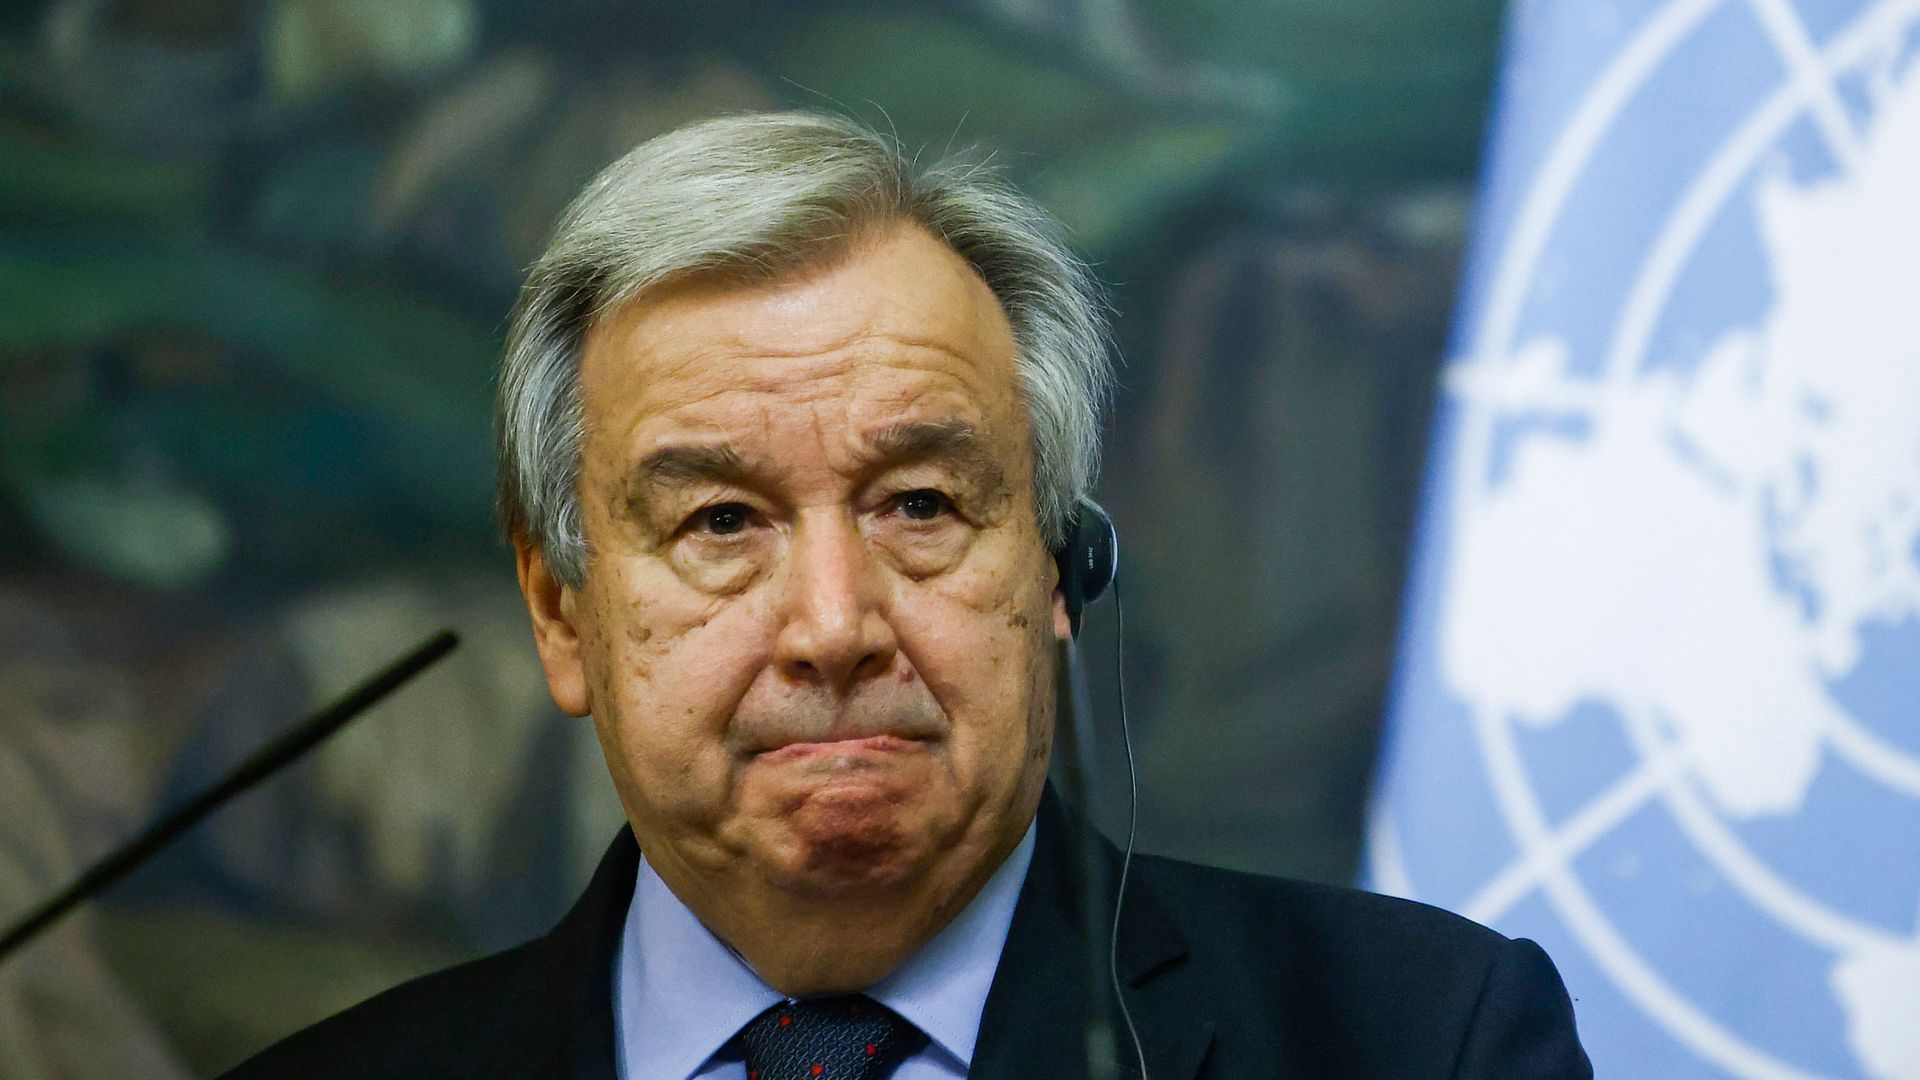 United Nations Secretary-General António Guterres during a press conference in Moscow in May 2021.